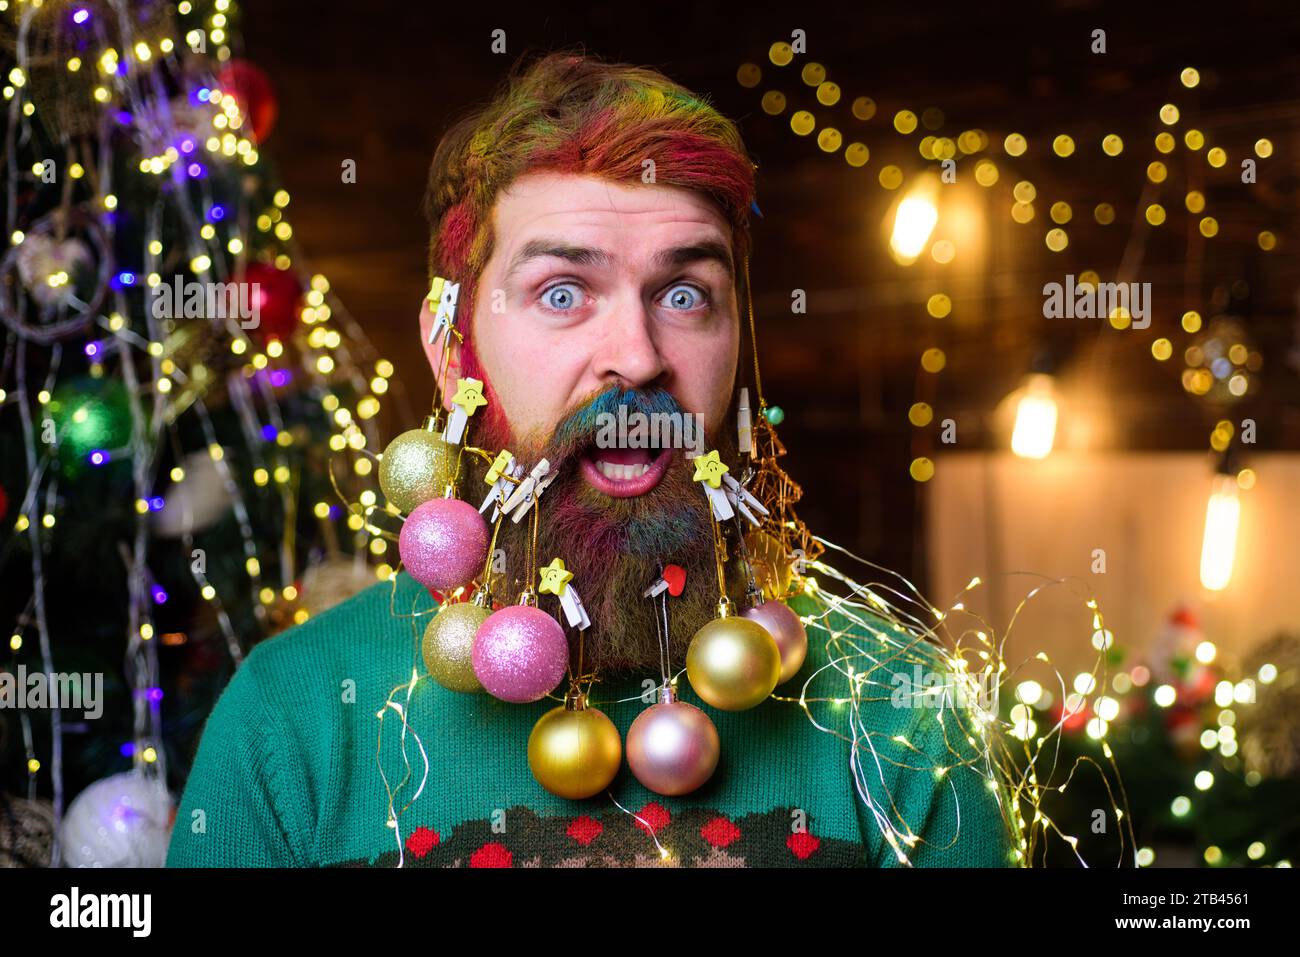 Merry Christmas and Happy New year. Closeup portrait of surprised man with decoration balls in his beard. Bearded man with decorated beard for Stock Photo